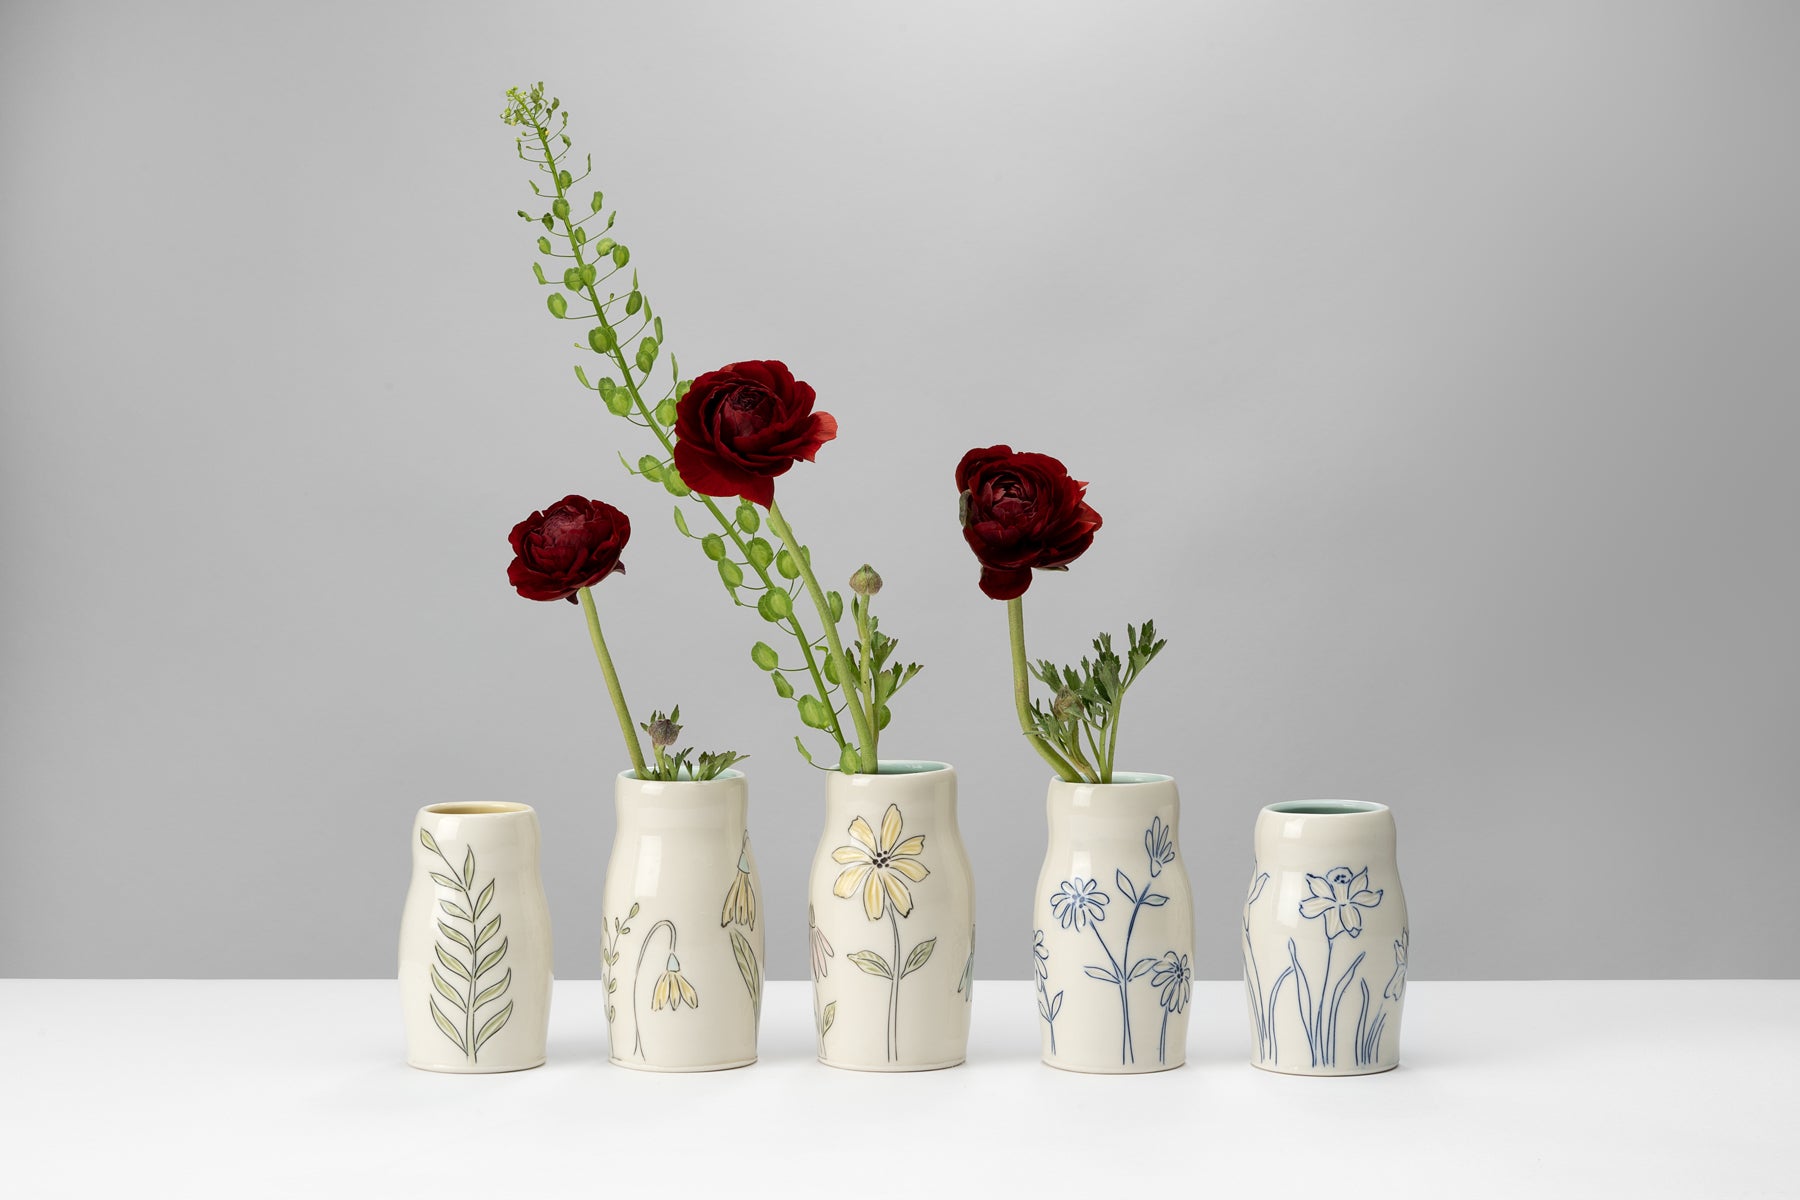 White and blue handmade porcelain pottery pieces by ceramic artist Julie Wiggins sit on a white table against a grey background and hold deep red flowers. Image by Loam